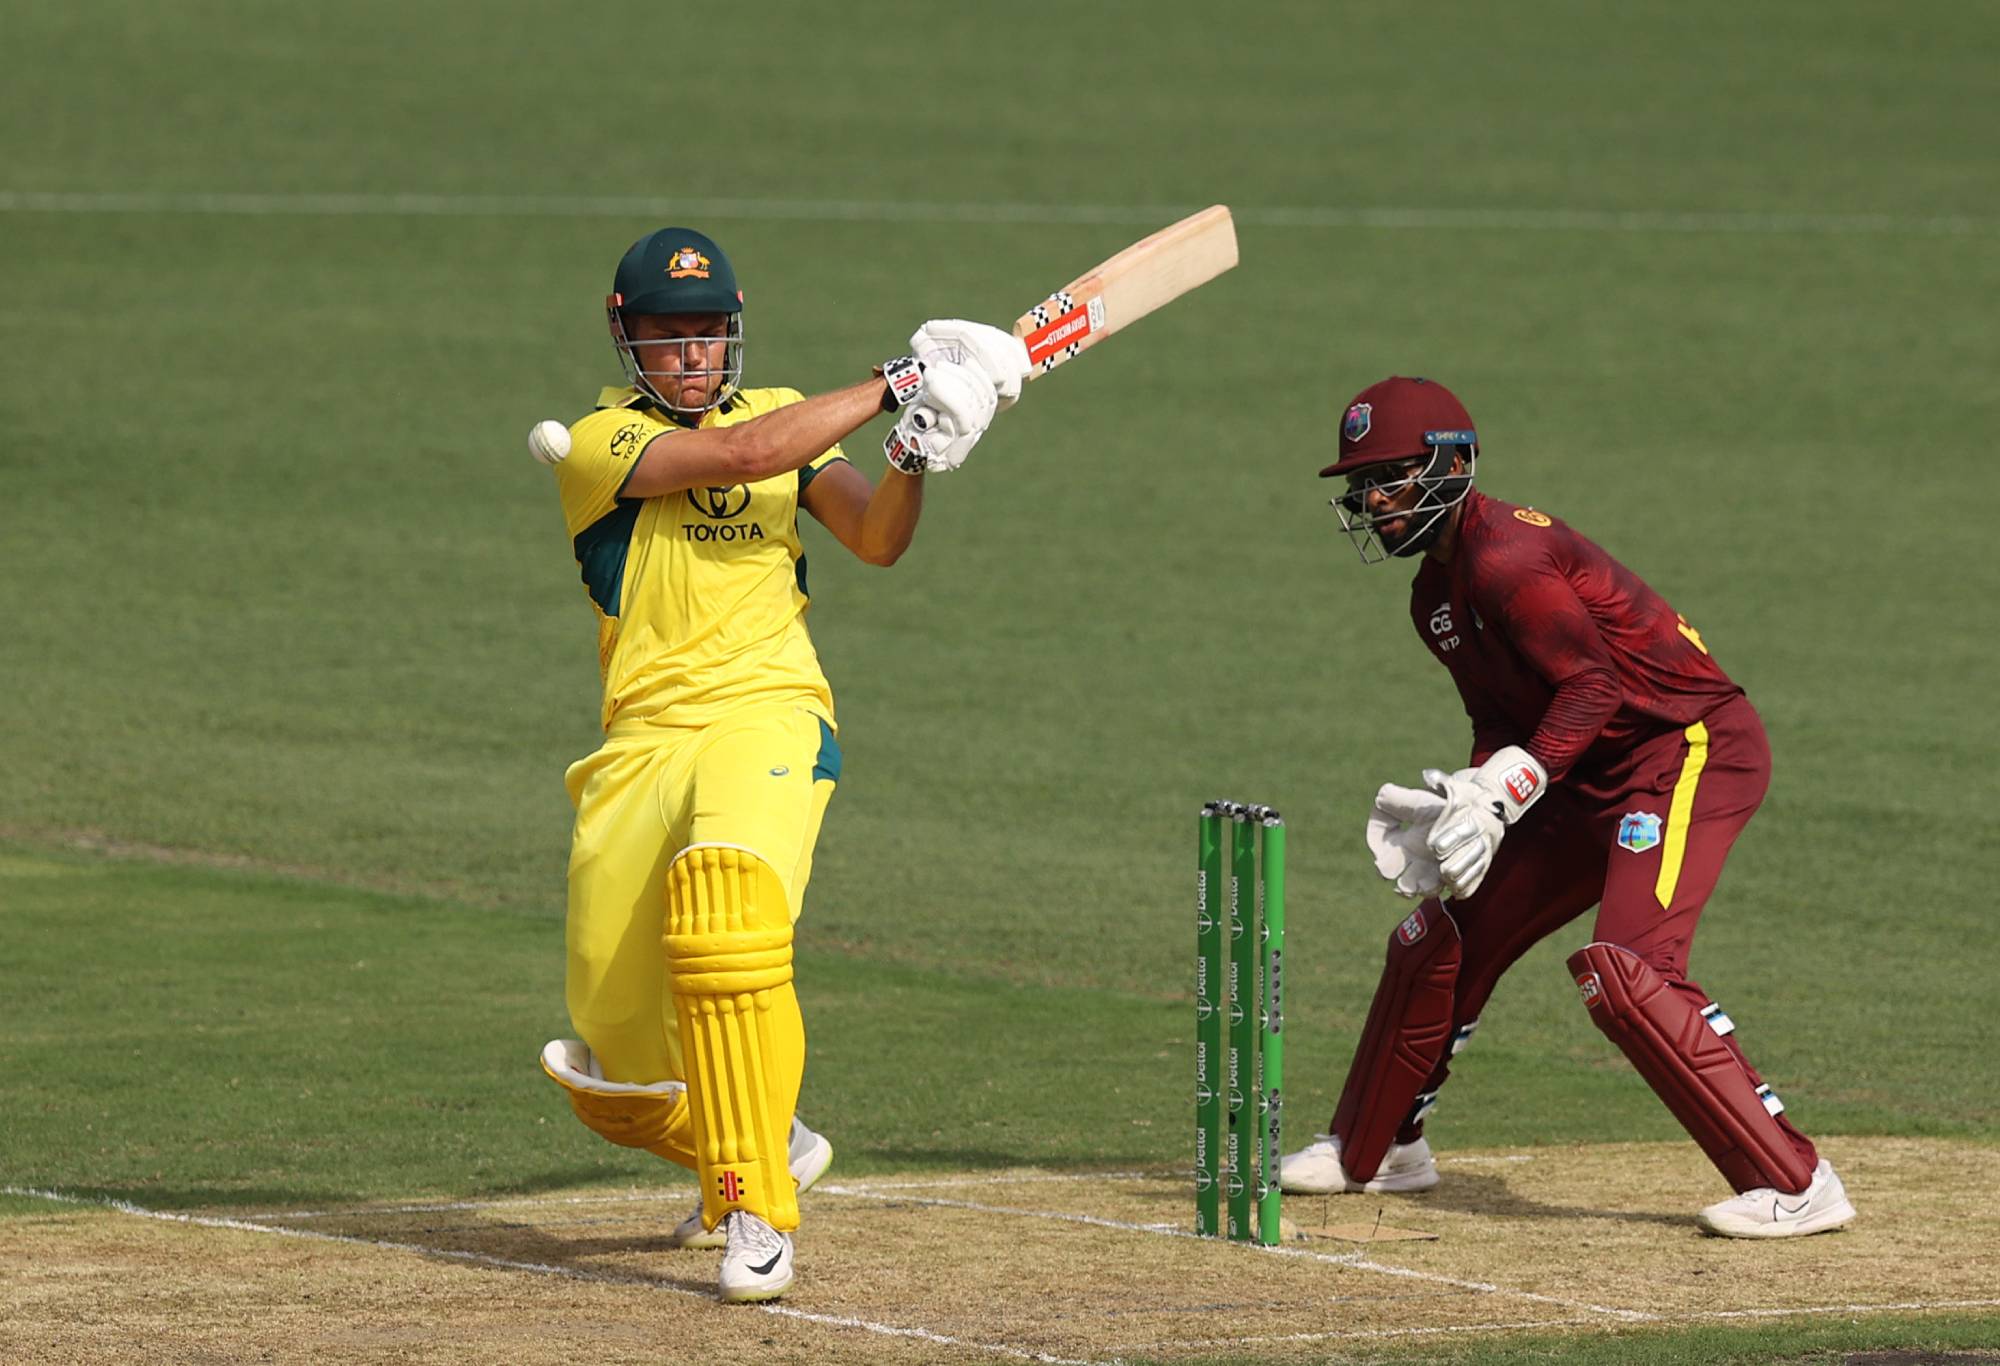 SYDNEY, AUSTRALIA - FEBRUARY 04: Aaron Hardie of Australia bats during game two of the Men's One Day International series between Australia and West Indies at Sydney Cricket Ground on February 04, 2024 in Sydney, Australia. (Photo by Jason McCawley - CA/Cricket Australia via Getty Images)